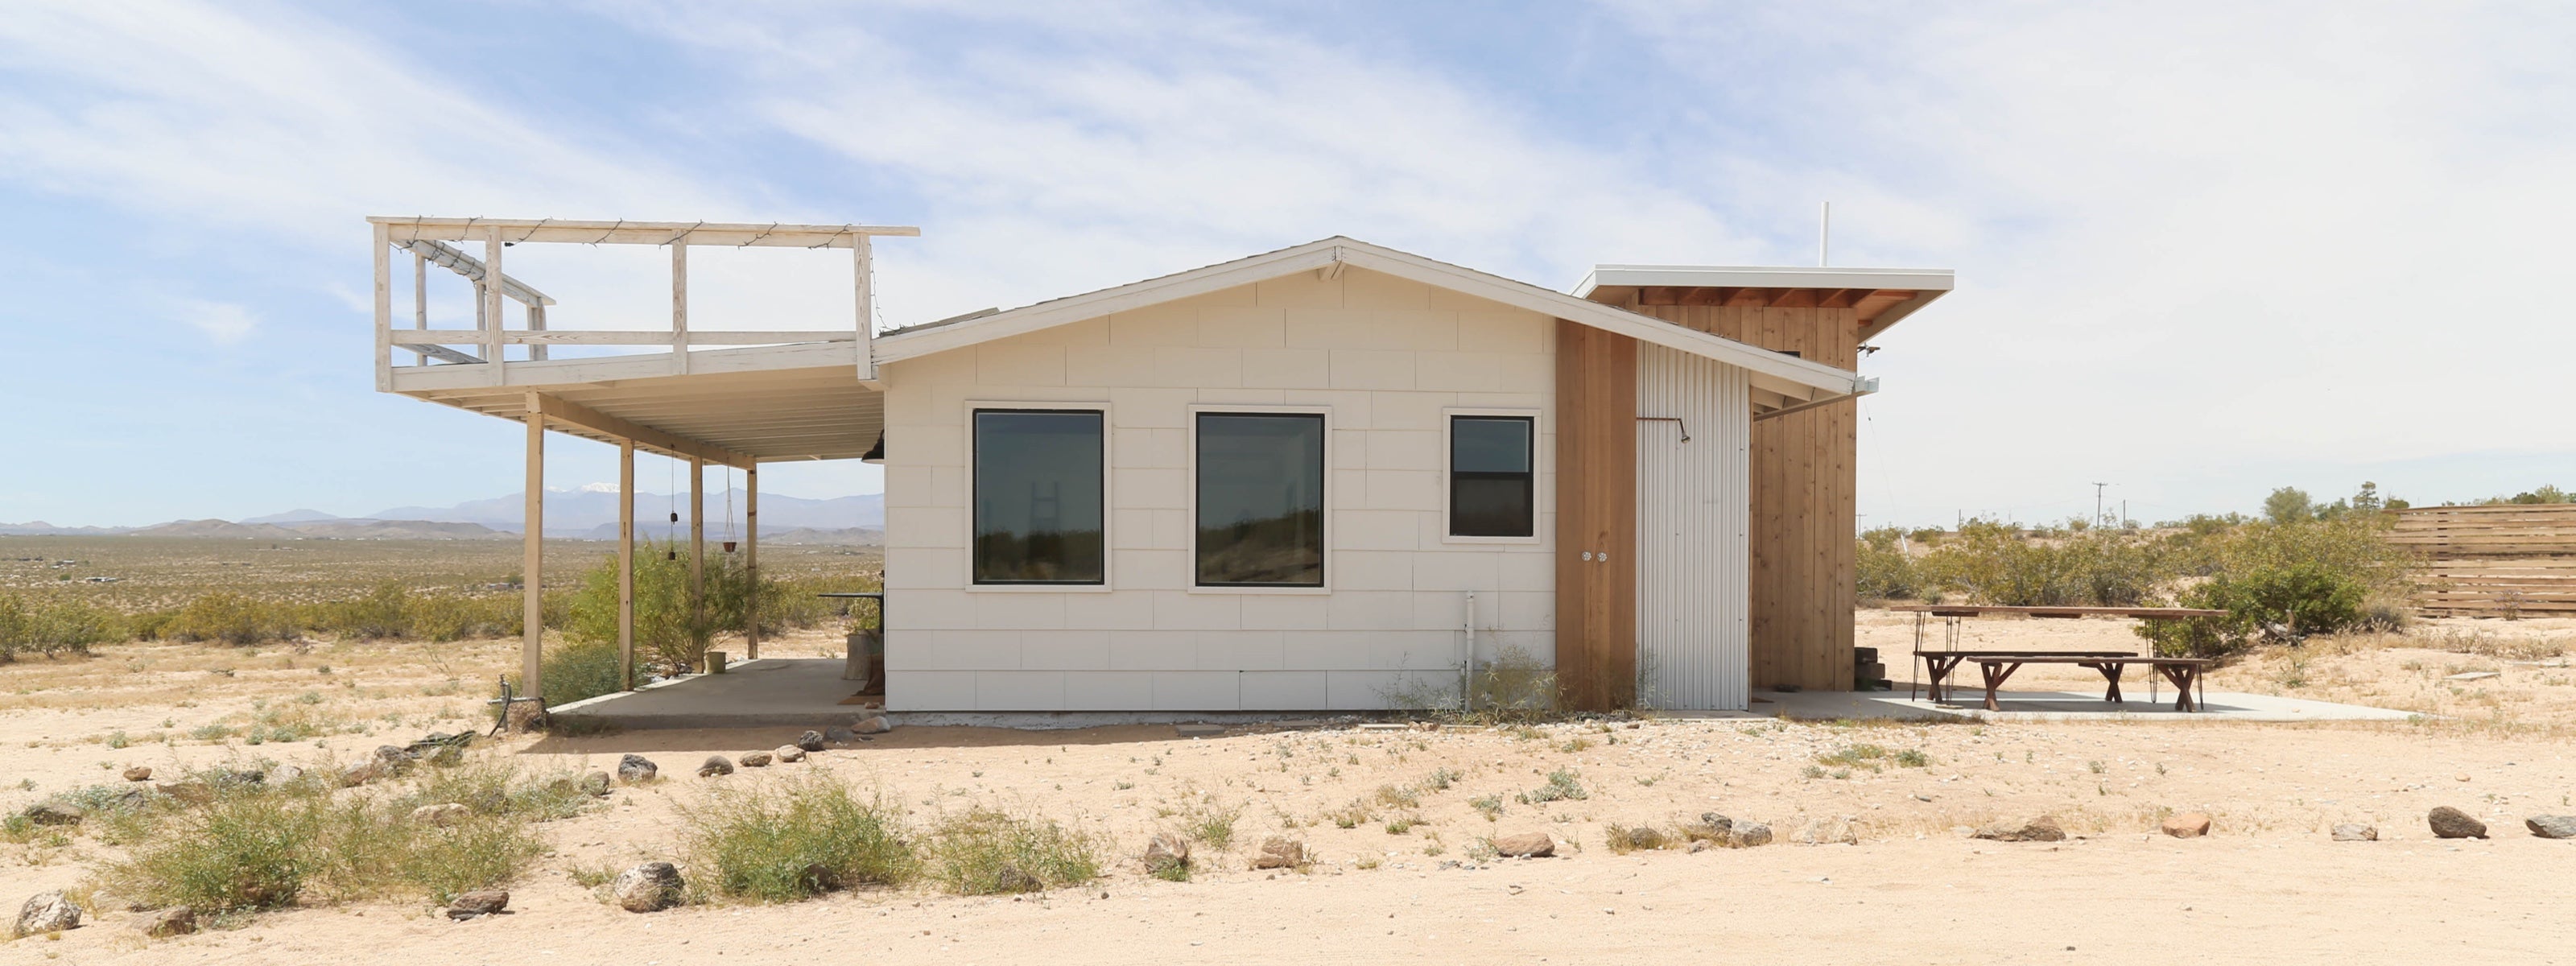 Campover Cabin in Joshua Tree, CA - Side view of exterior